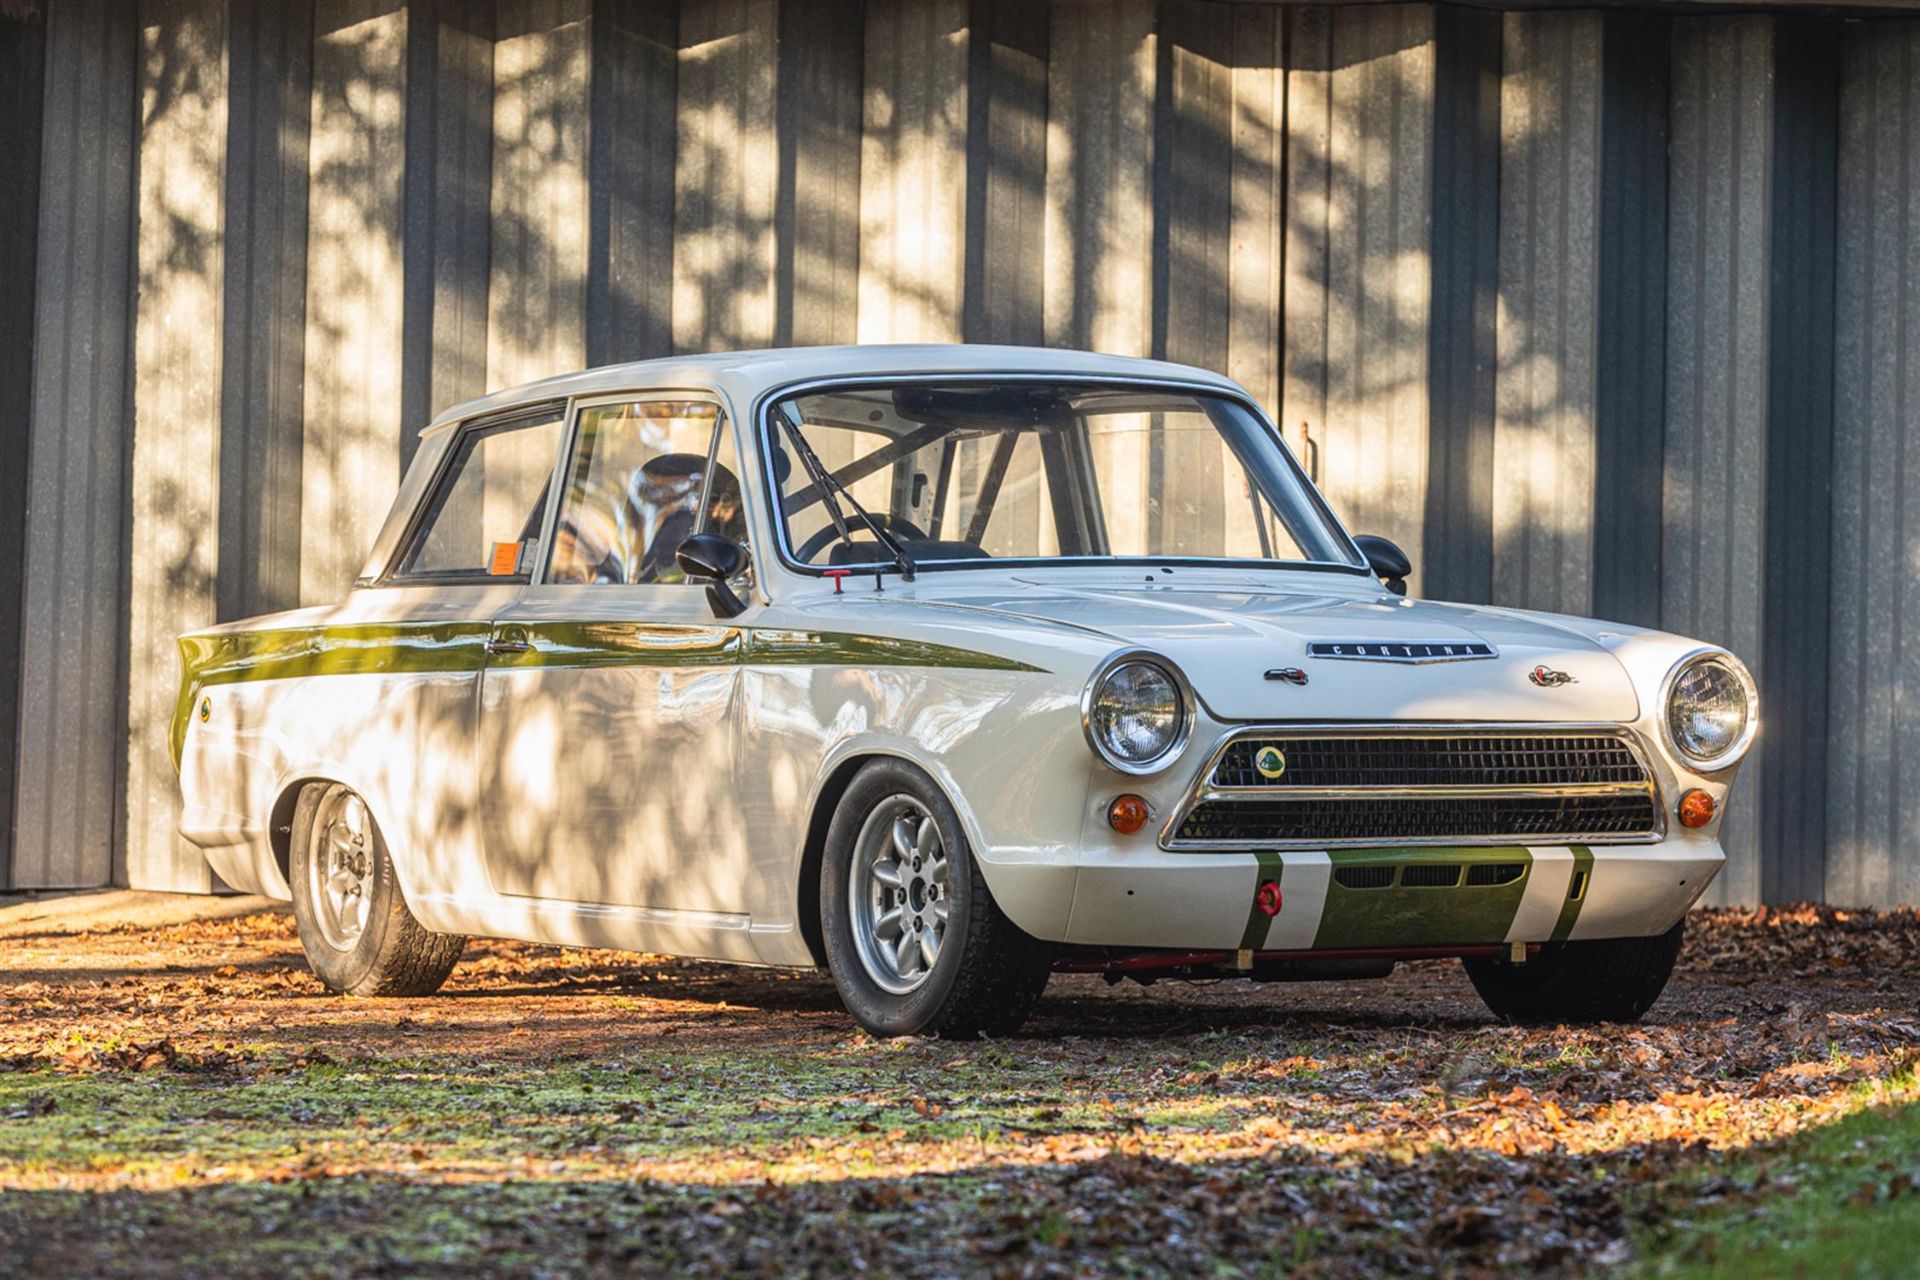 1964 Ford Lotus Cortina Competition Car